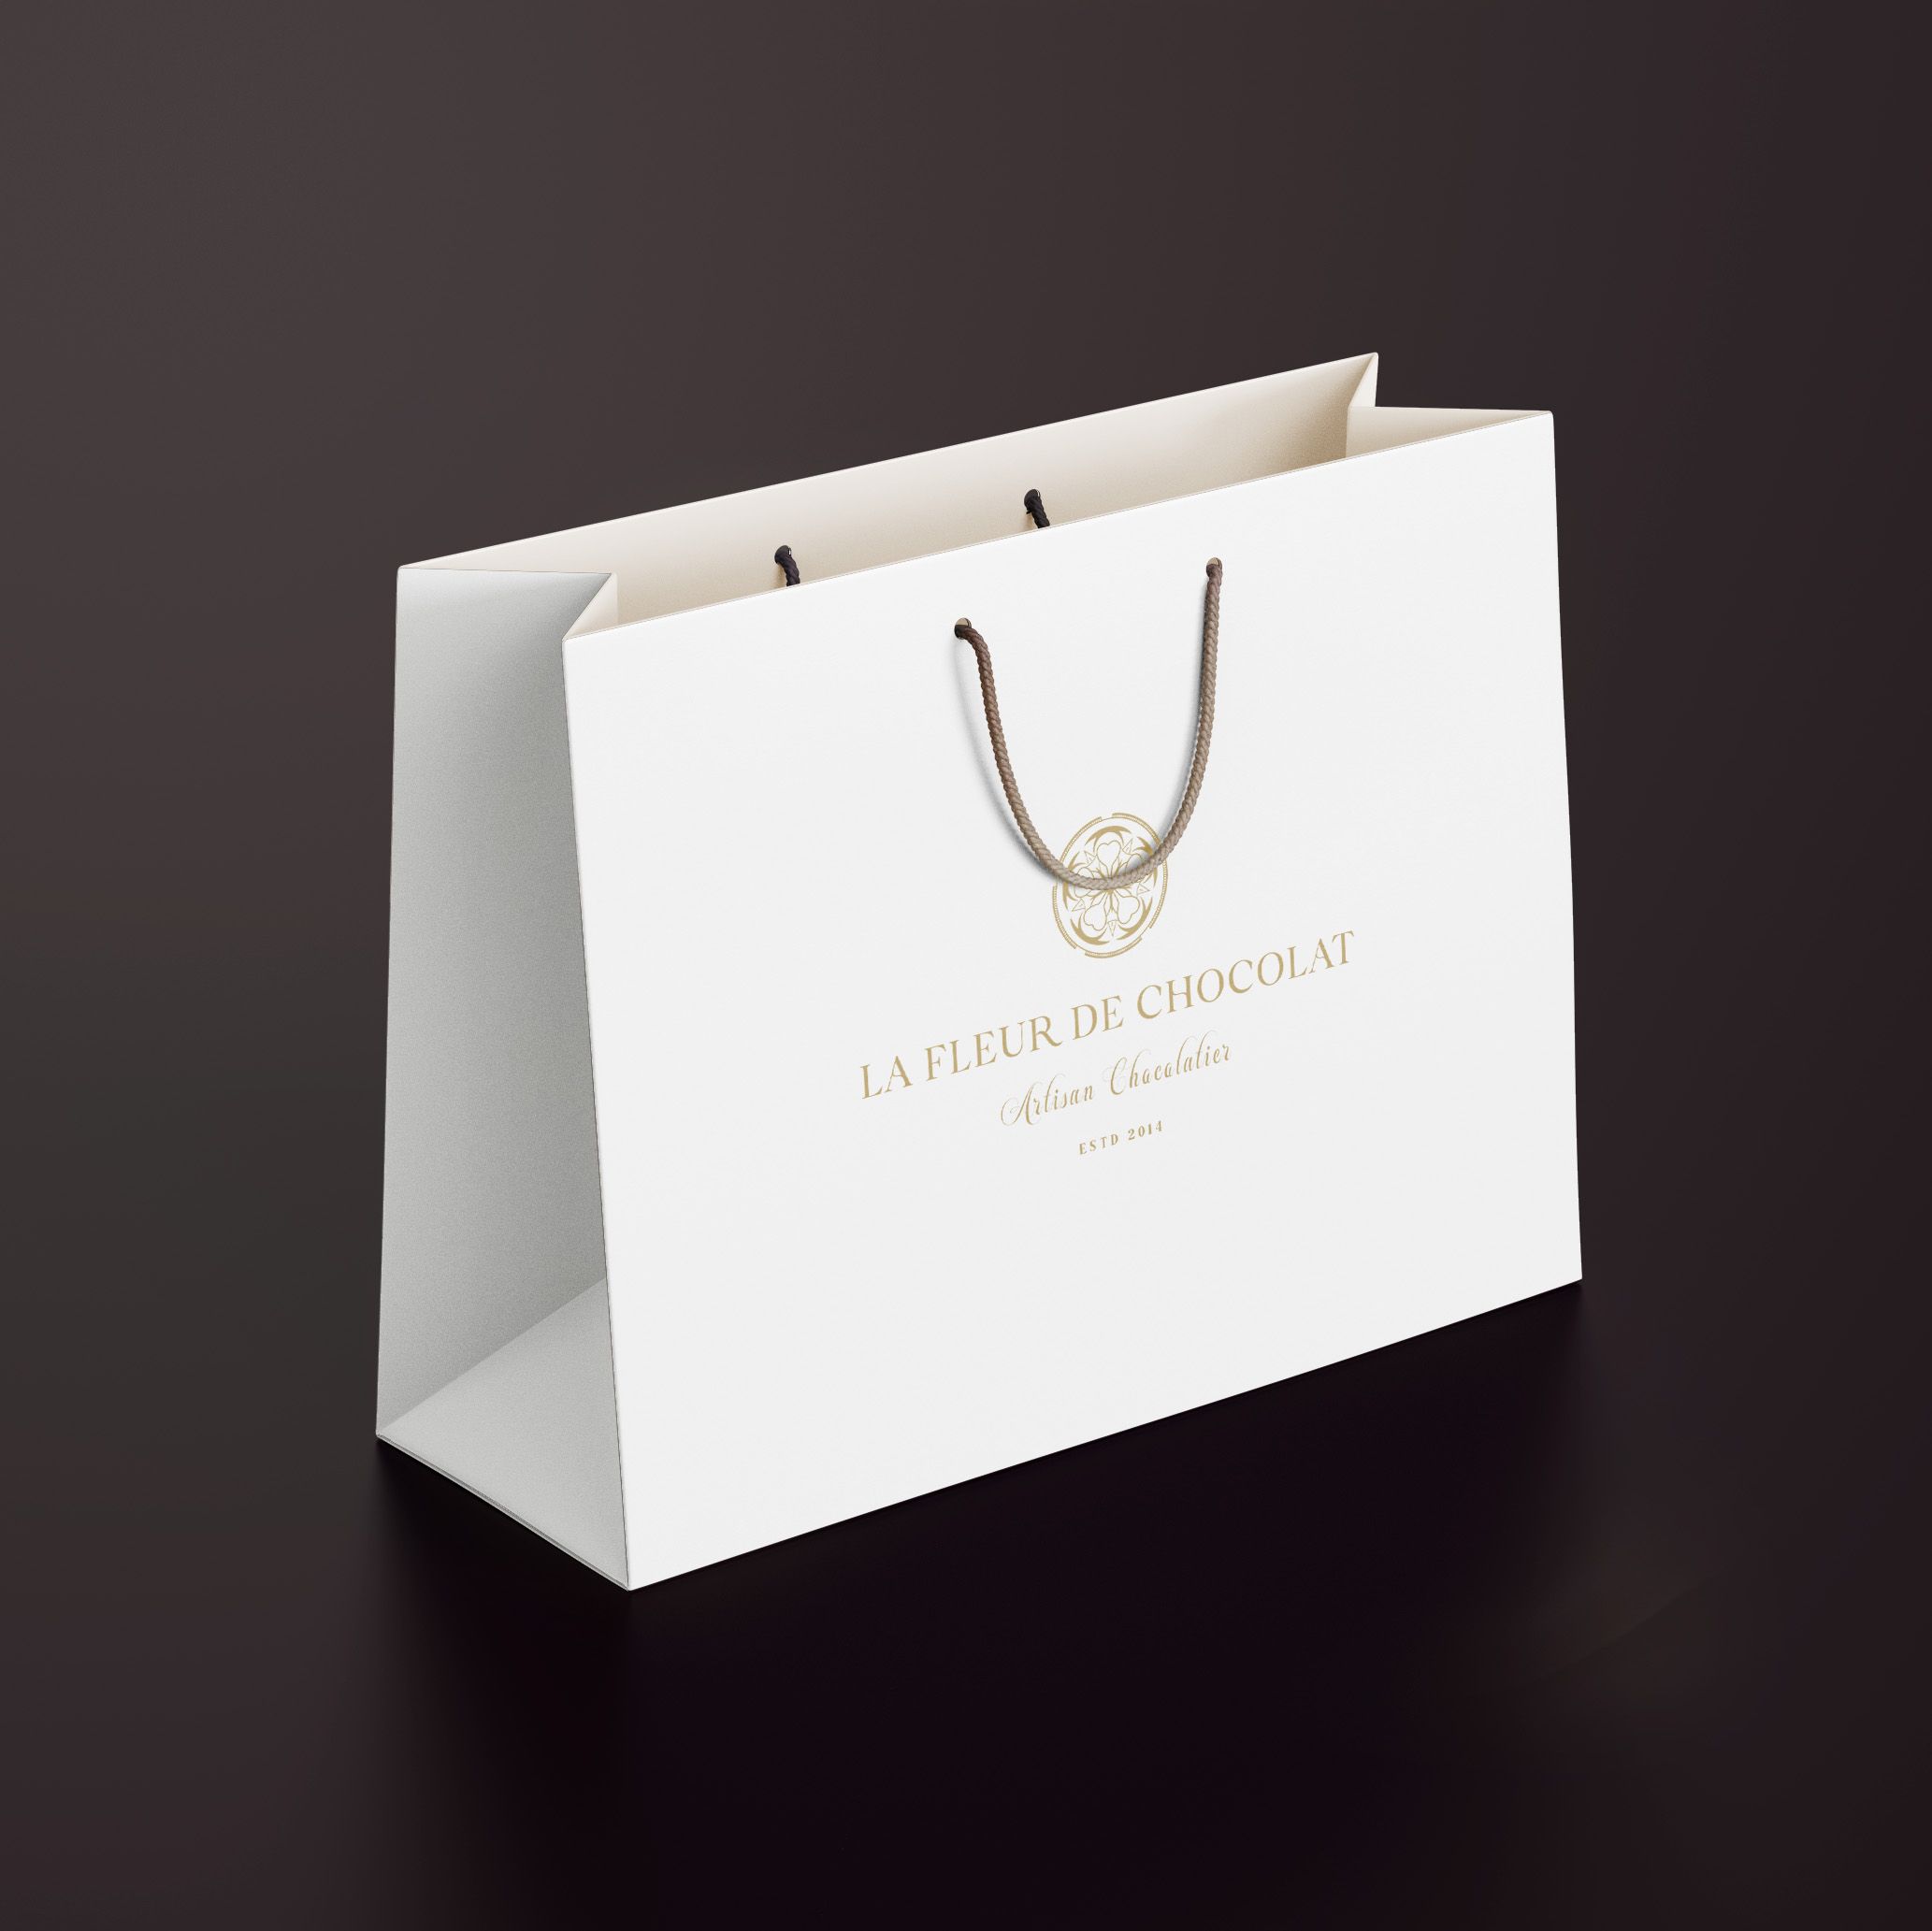 Luxury chocolate branded bag, white with gold foiled logo